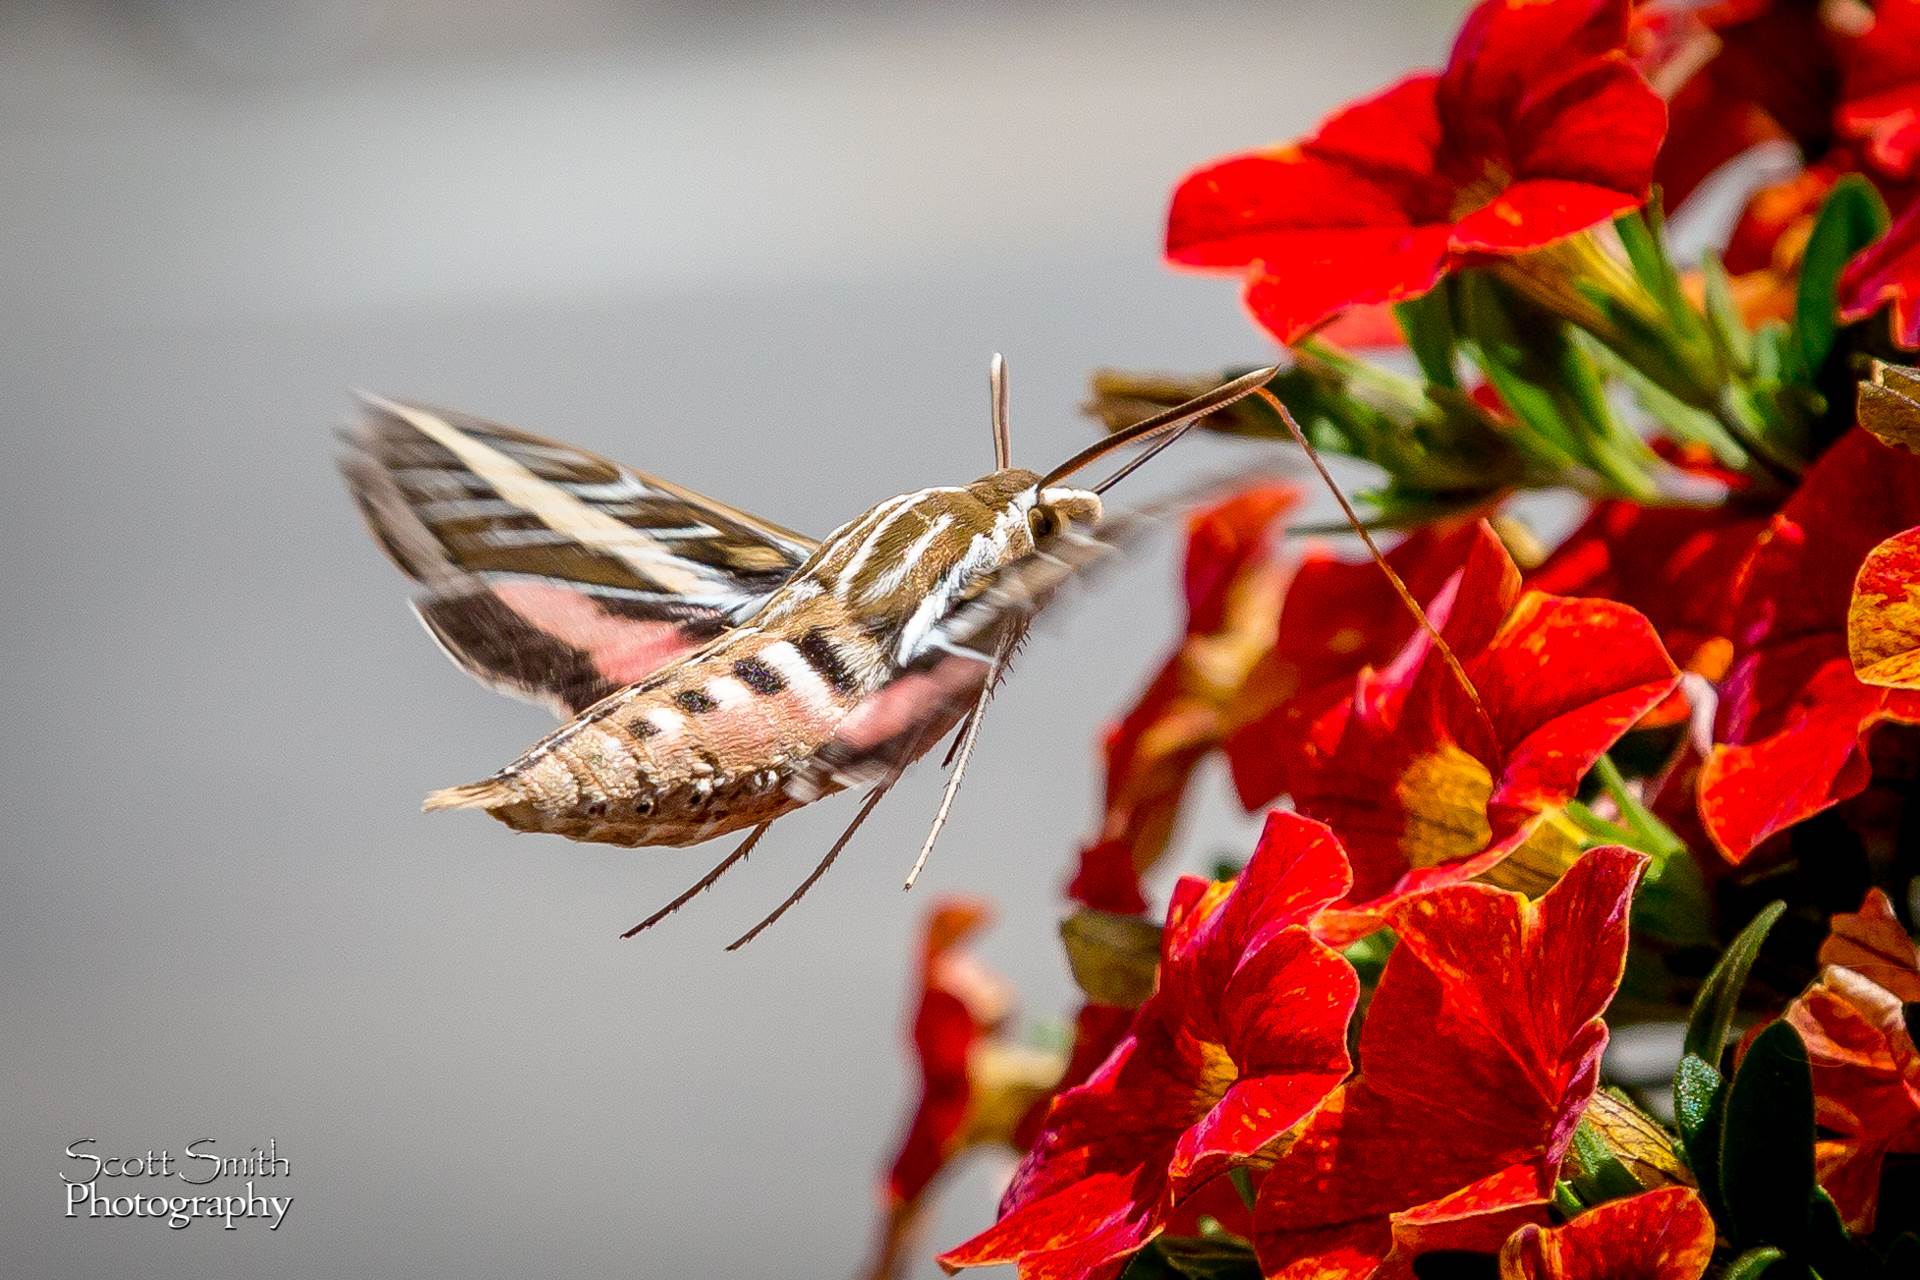 Hawk Moth - A large Hawk Moth feeds on some summer flowers in Frisco, CO. by Scott Smith Photos